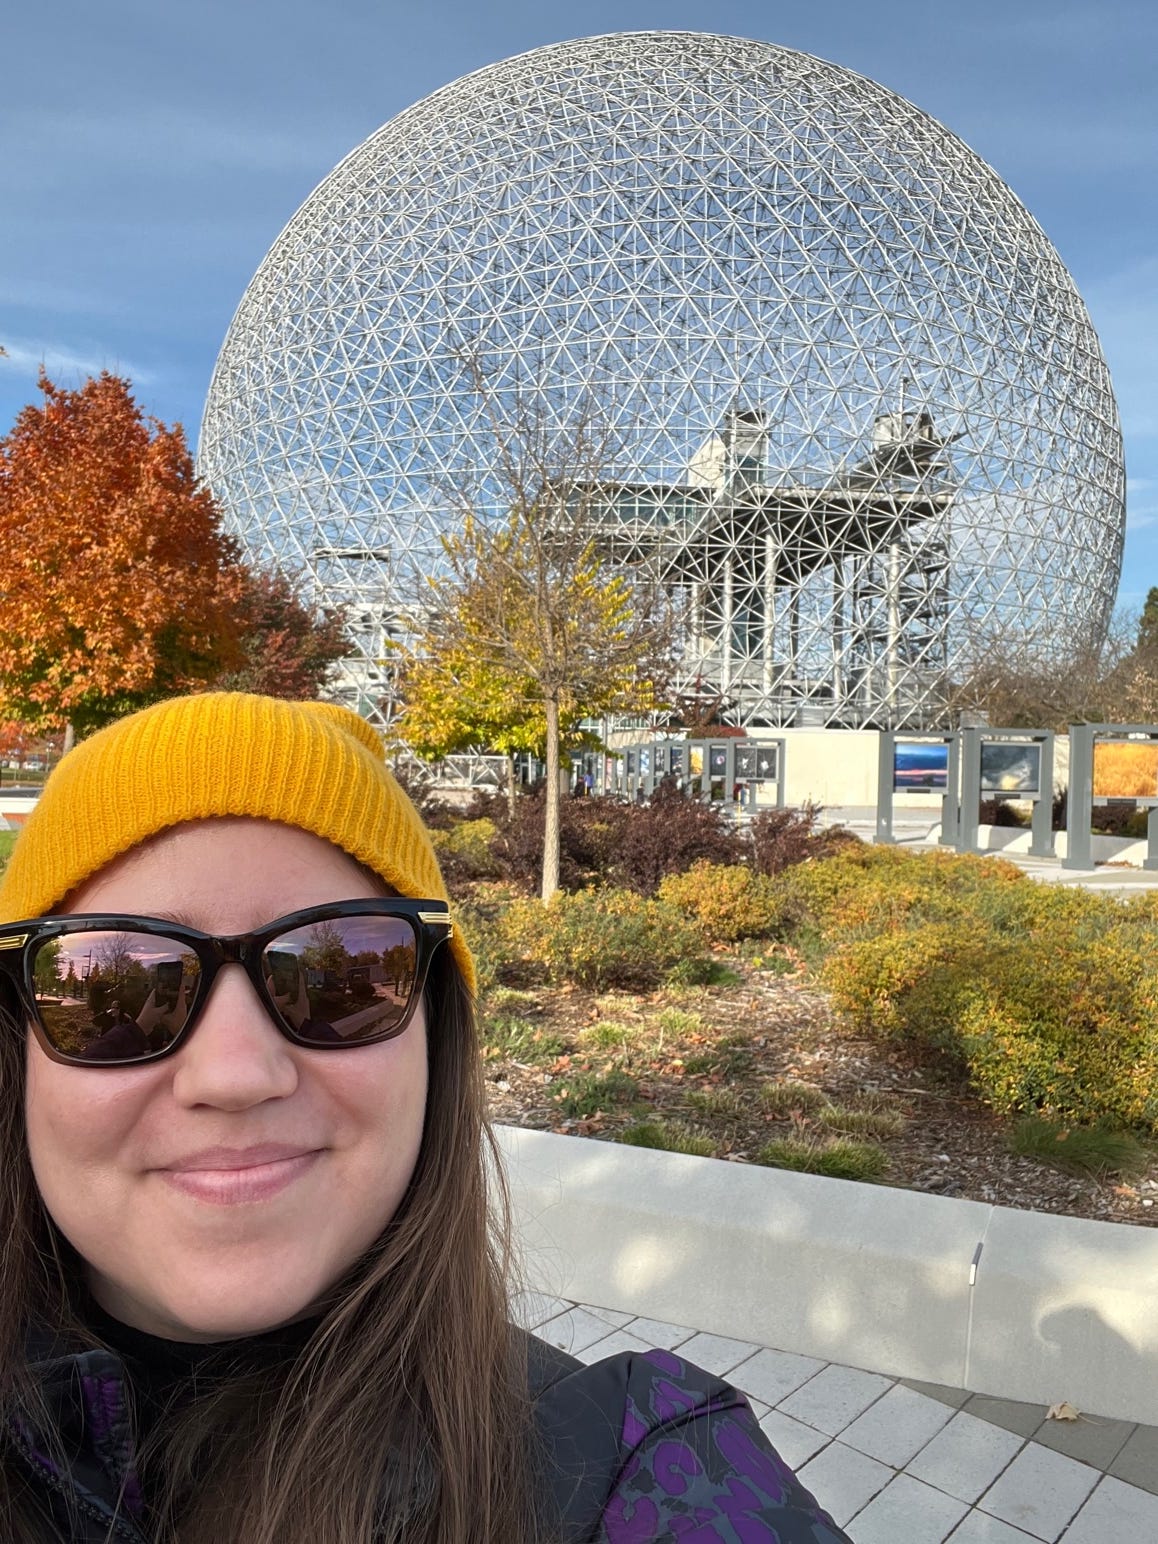 A selfie of a girl with brown hair, a yellow hat, and a purple jacket wearing sunglasses in front of the Biosphere of Montreal